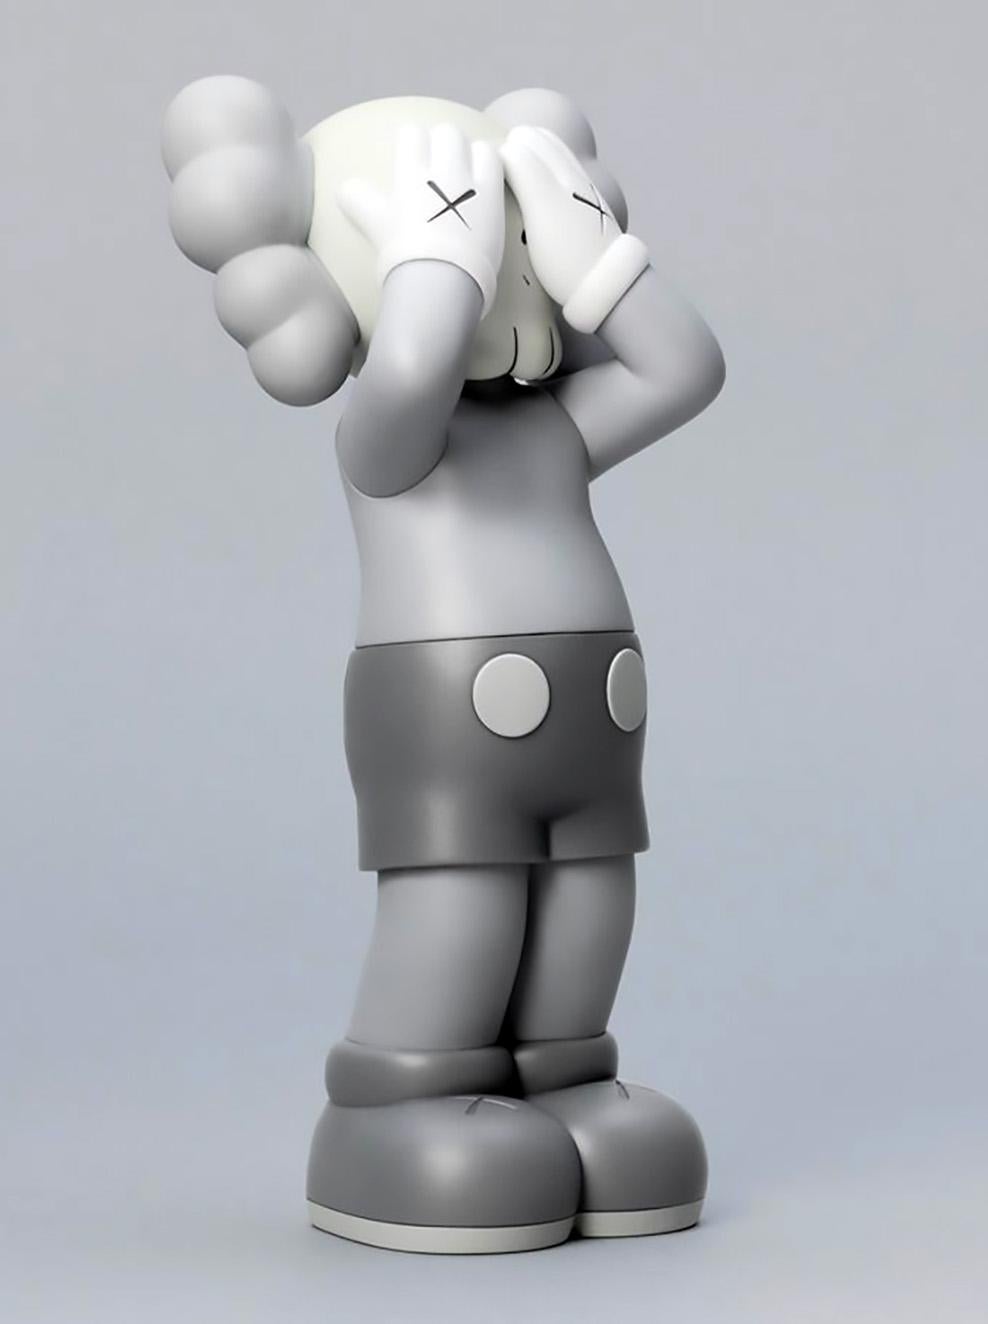 KAWS: HOLIDAY United Kingdom Grey (KAWS UK): 
KAWS' signature character COMPANION presented in an upright standing position with its eyes covered. New in their original packaging - published by All Rights Reserved to commemorate the debut of KAWS’